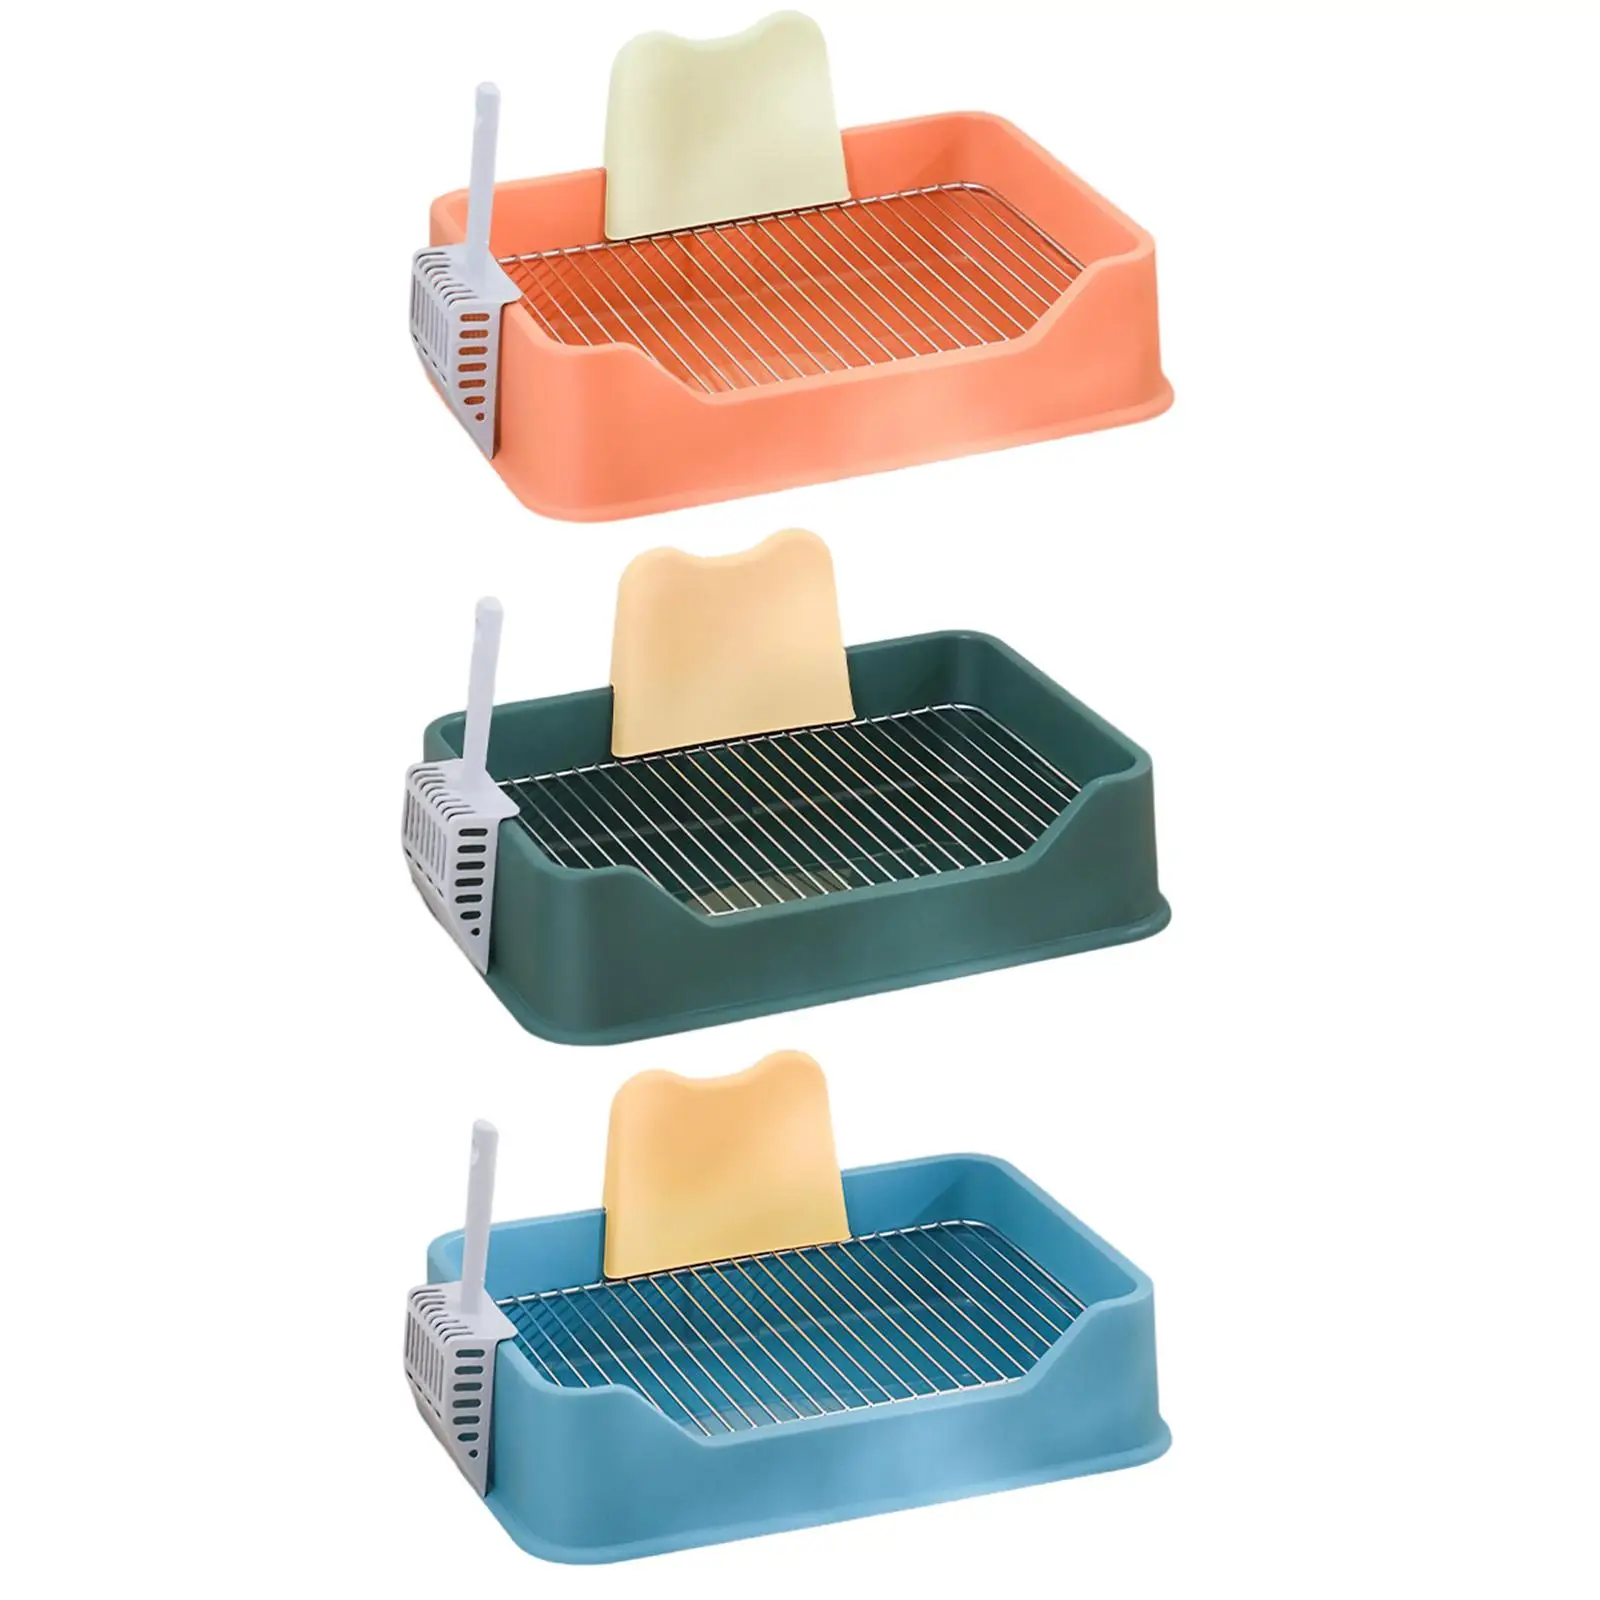 Dog Toilet Puppy Training Potty Tray Easy to Clean Tool Pet Accessories Reusable Puppy Training Tray Potty Tray